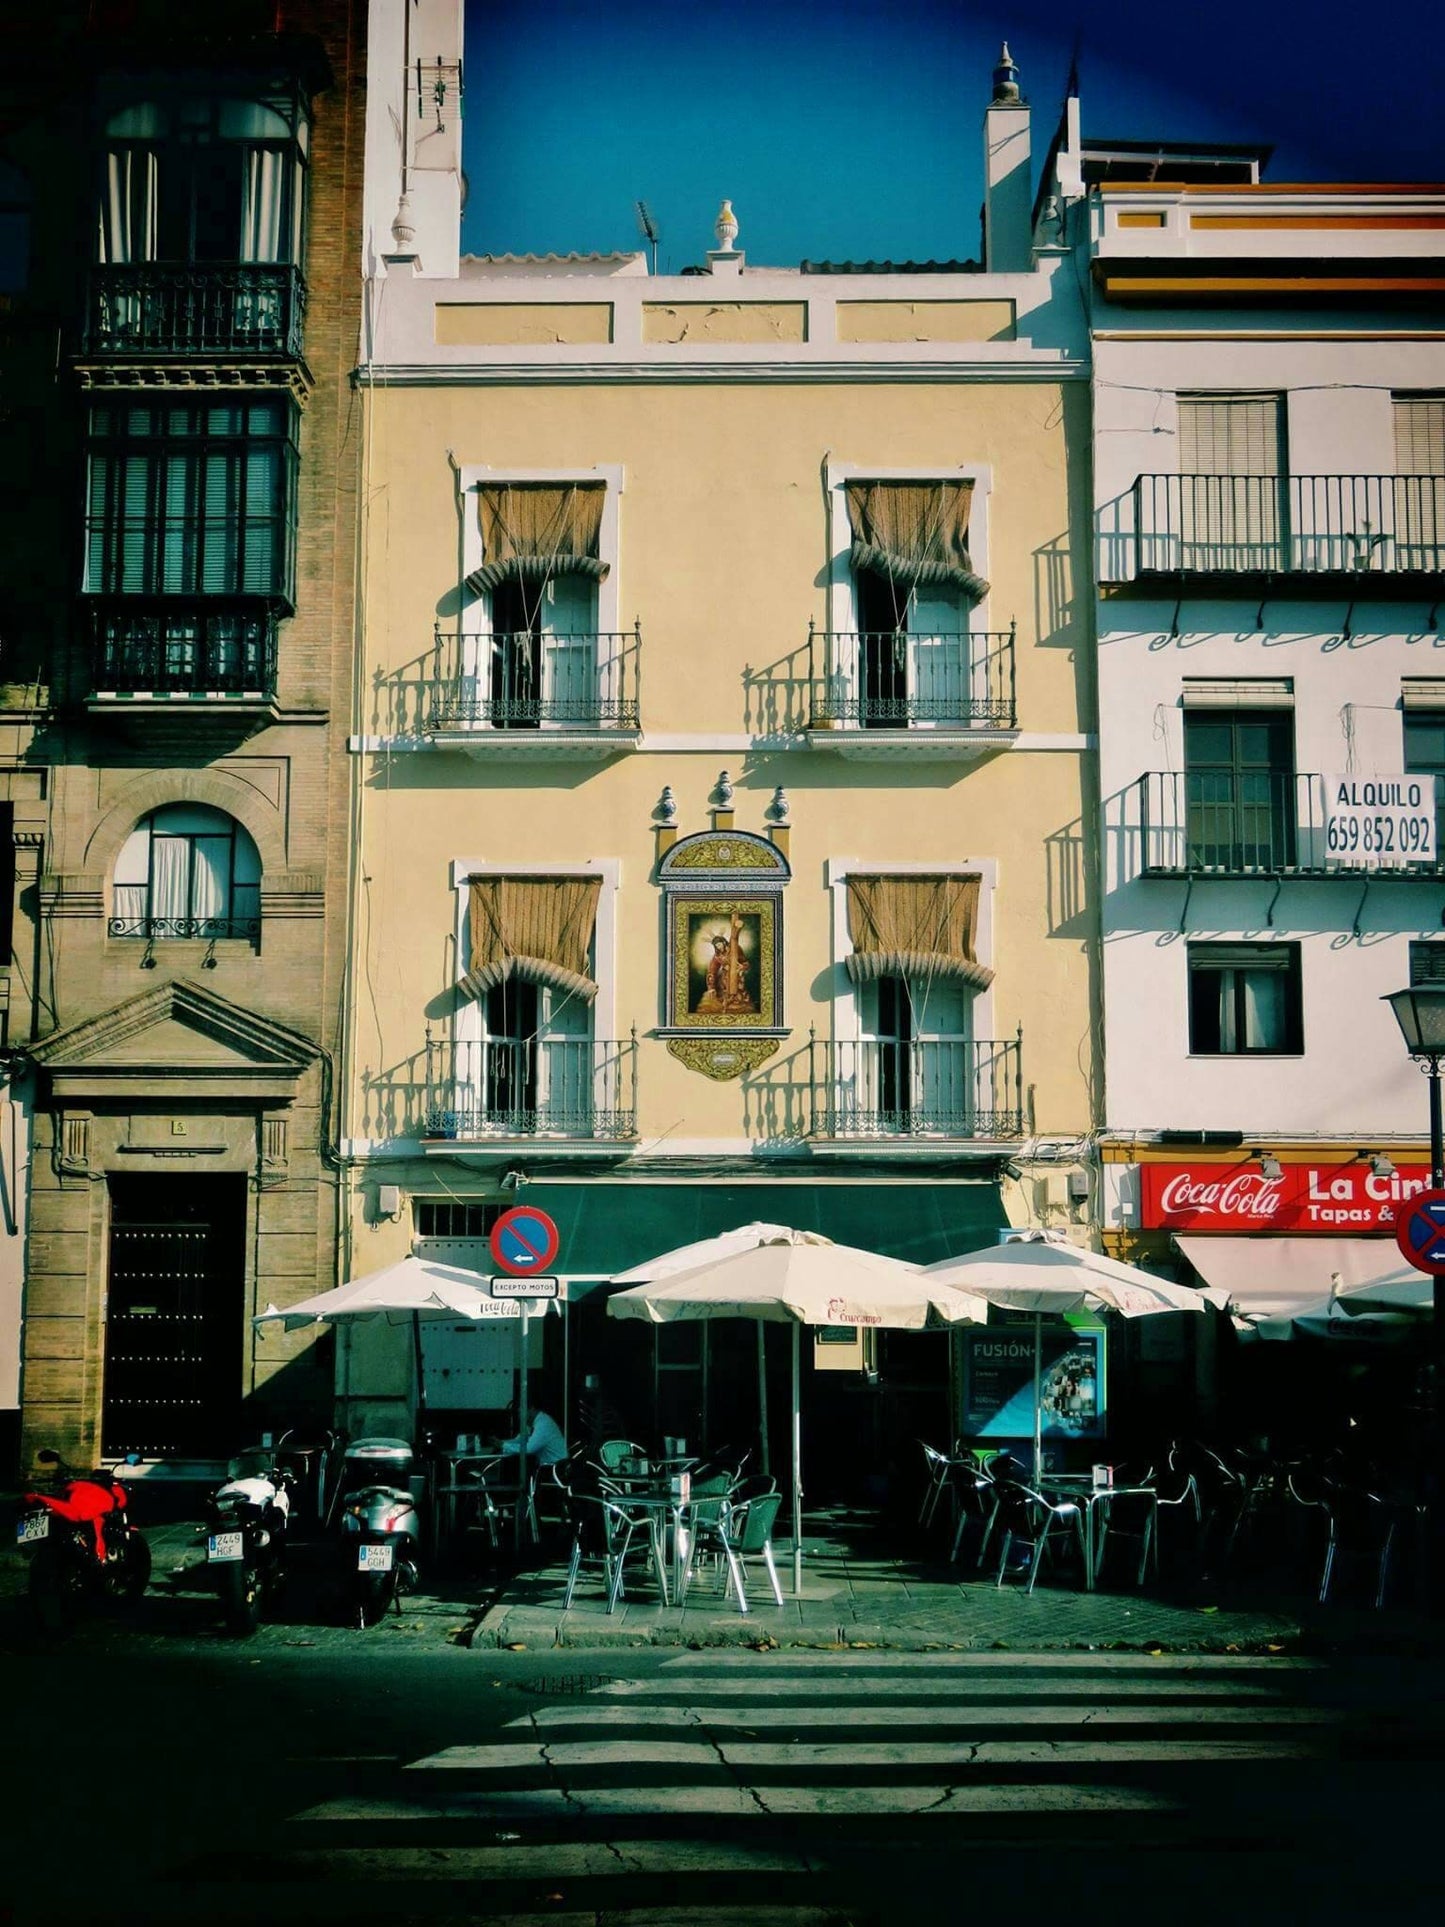 Seville Print Andalucia Spain Photography